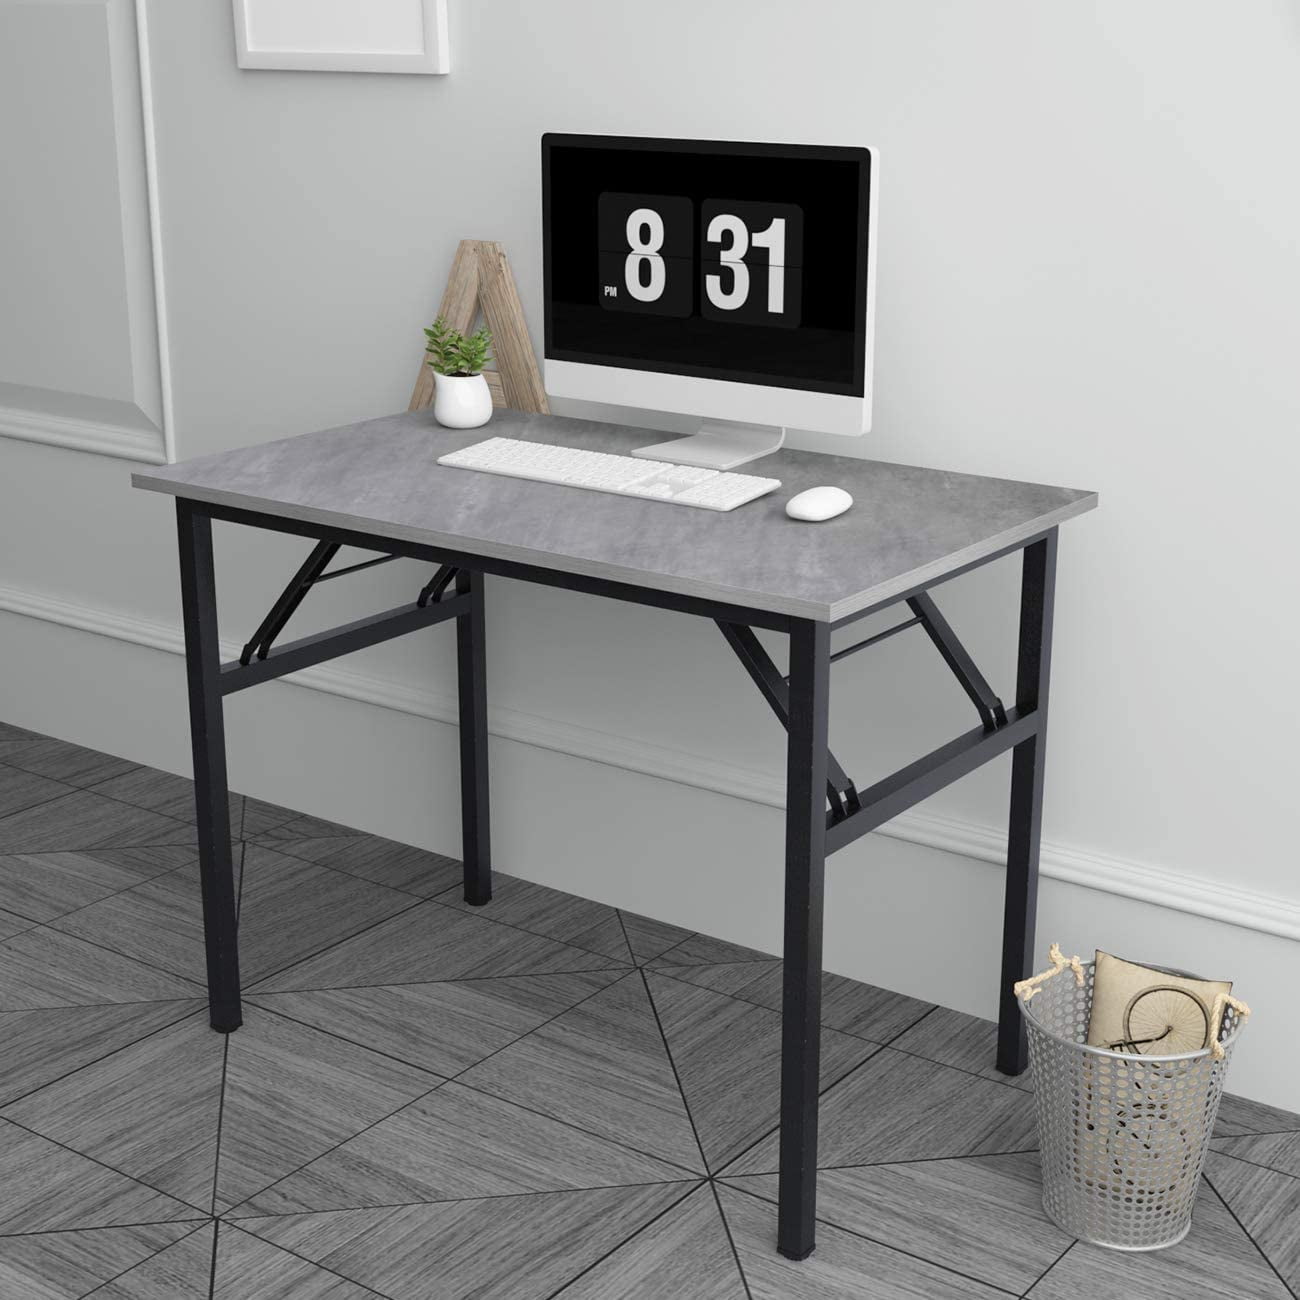 Need 39.4 inch Computer Desk for Small Space Small Folding Table Small Writing Desk Compact Desk Foldable Desk with BIFMA Certification No Install Needed Grey AC5-10060-LB